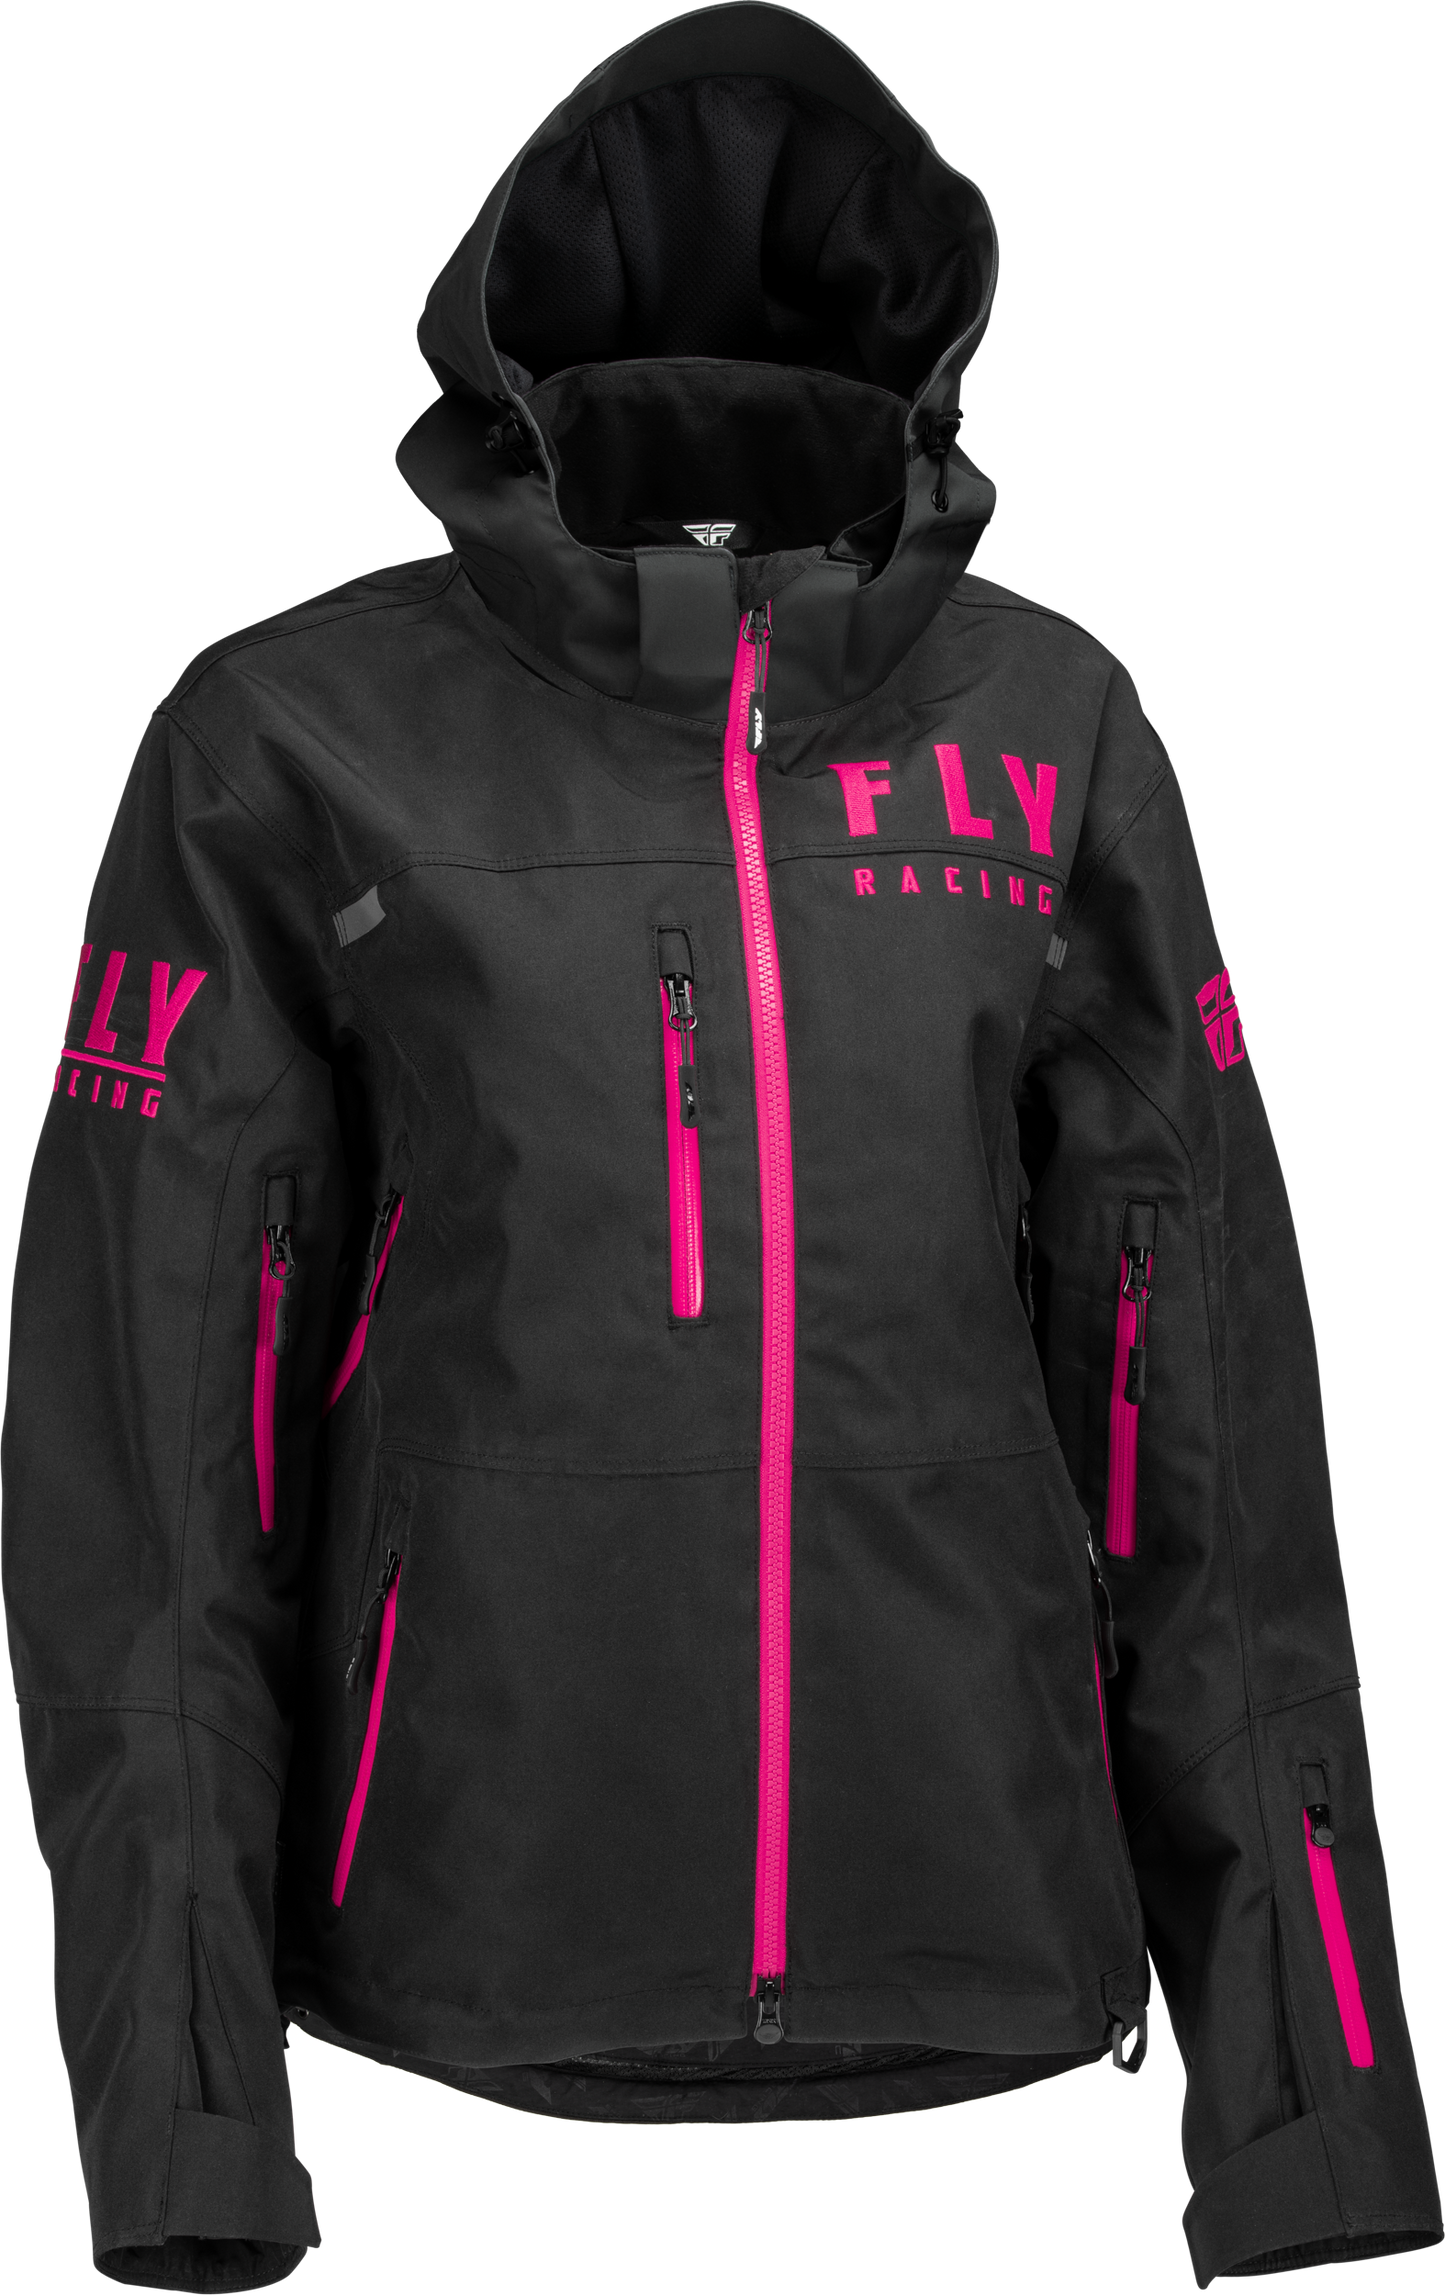 FLY RACING Women's Carbon Jacket Black/Pink Xs 470-4502XS